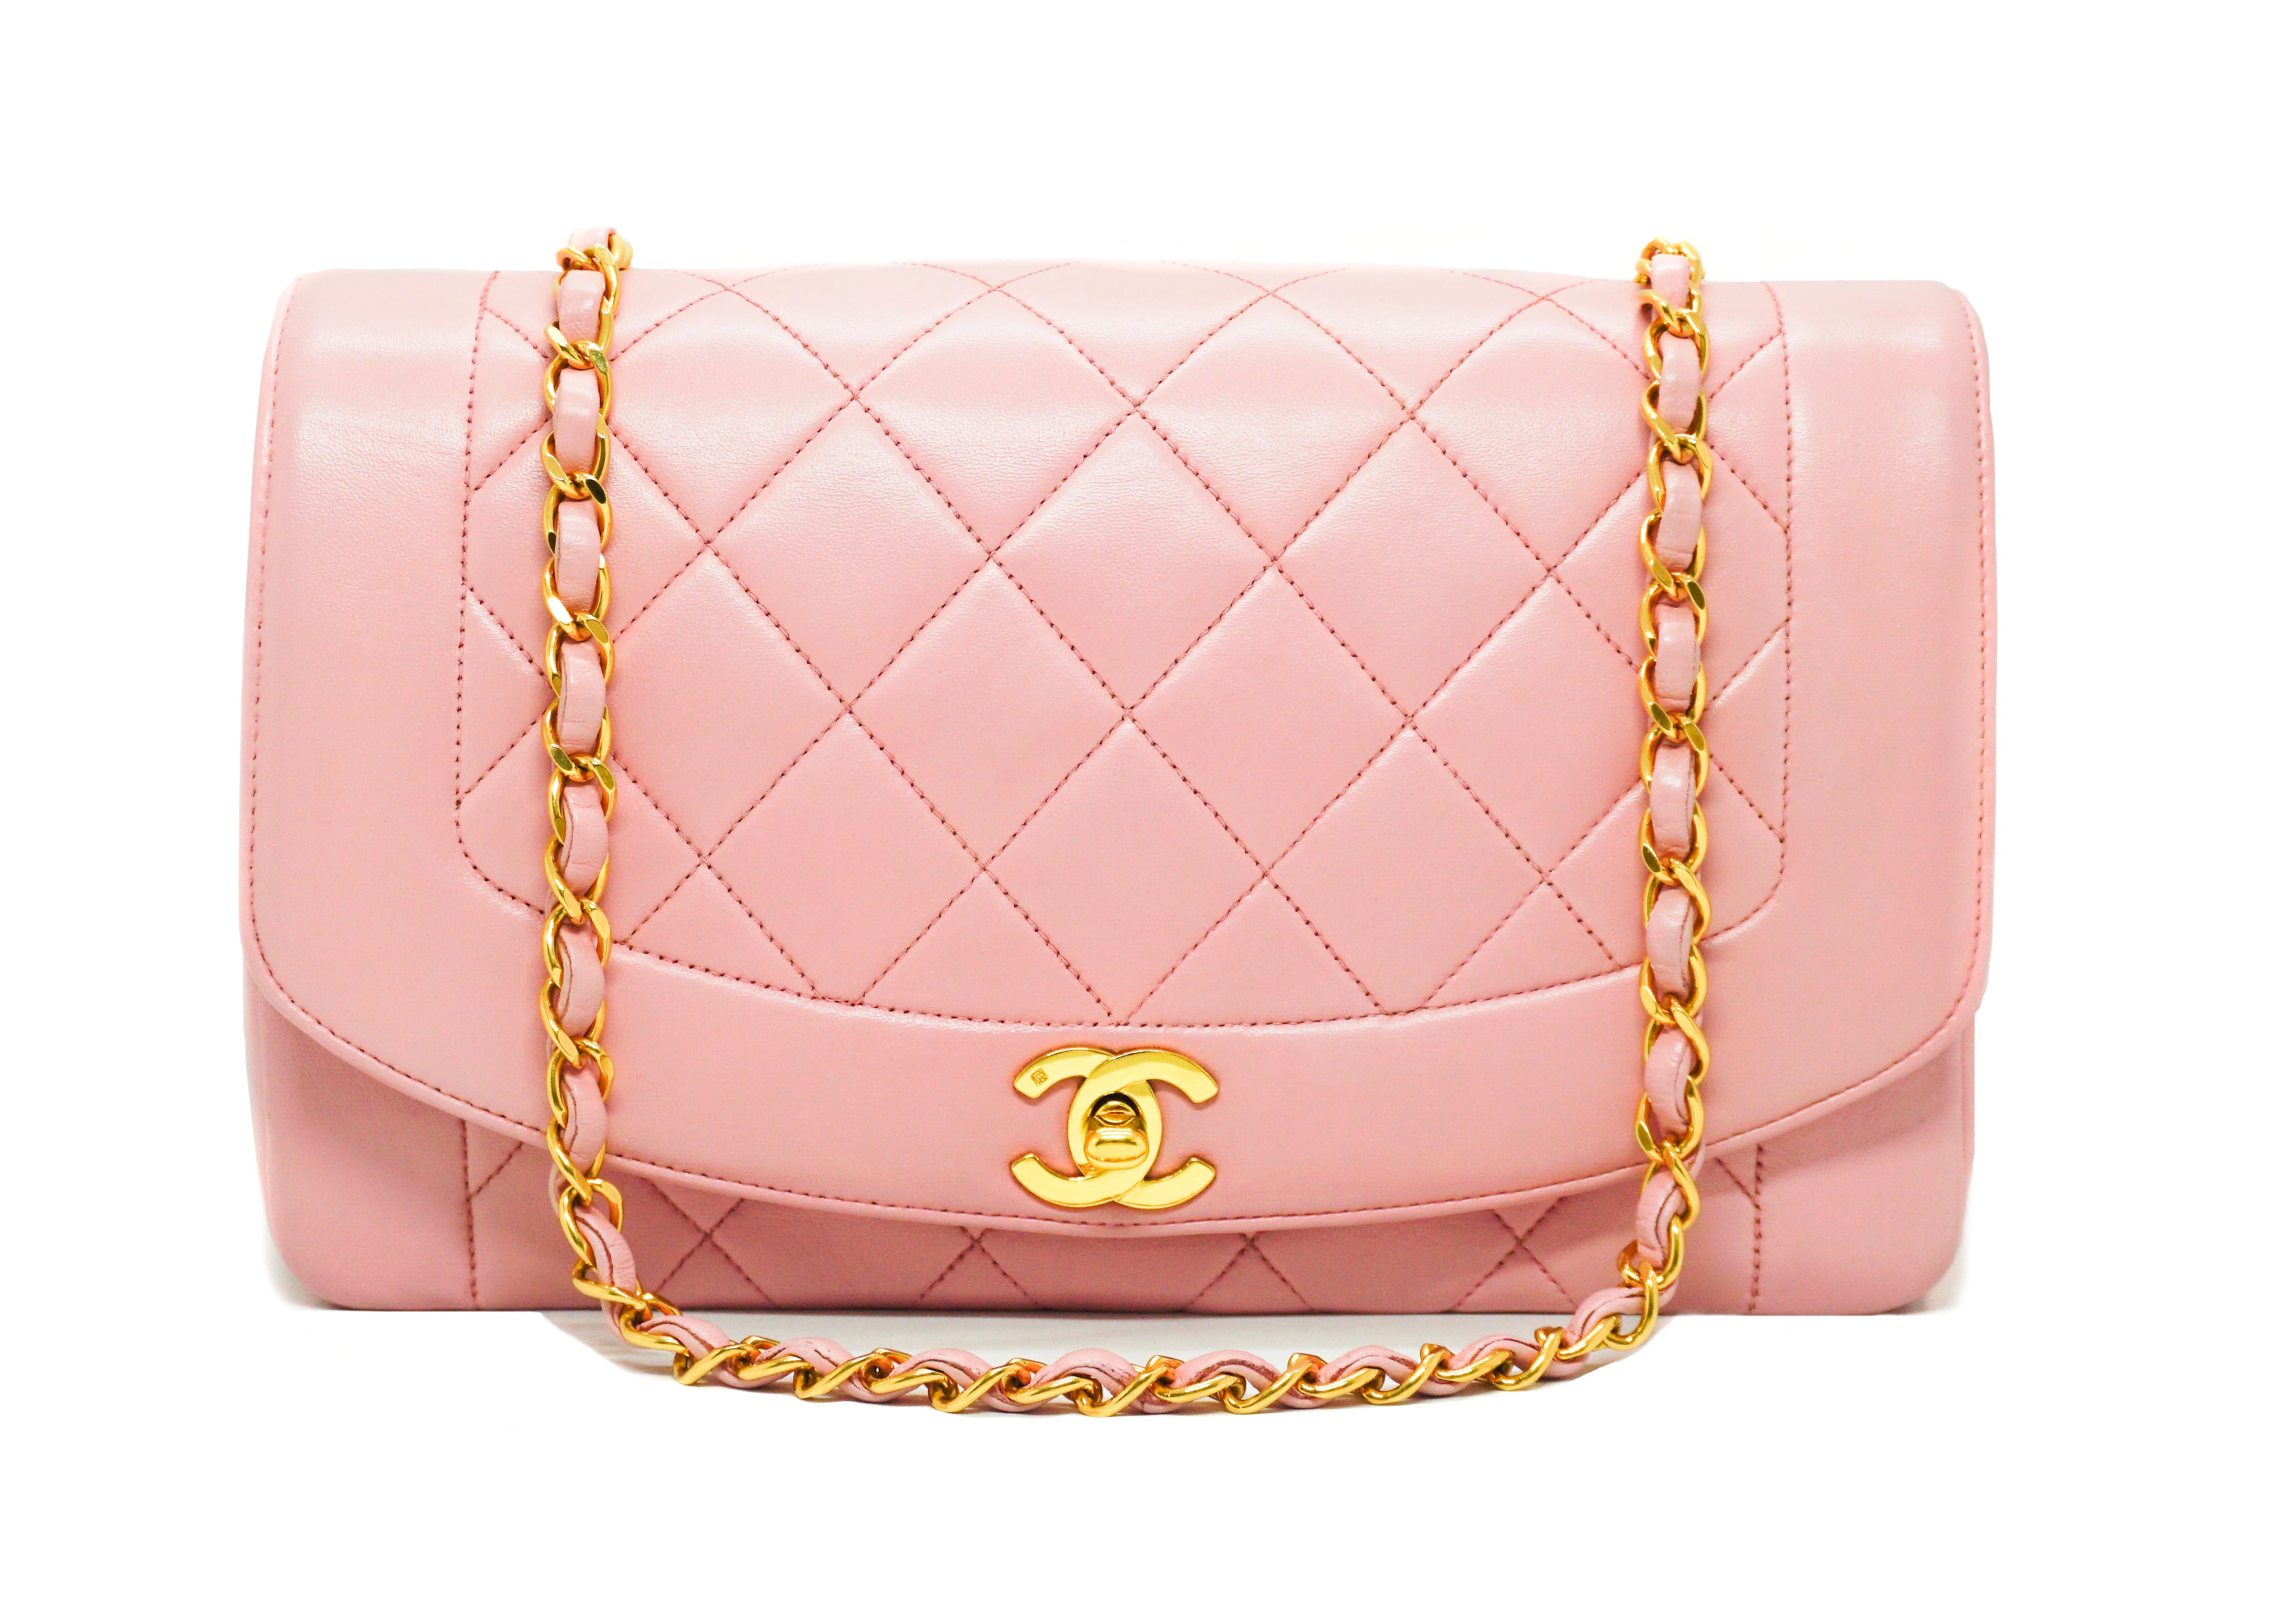 VINTAGE QOO TOKYO - 🎀🥑 Diana flap bag in Pink 1992 made in France #chanel  #vintageqoo —————————-—————— You can find it on our online store. Please  send a dm